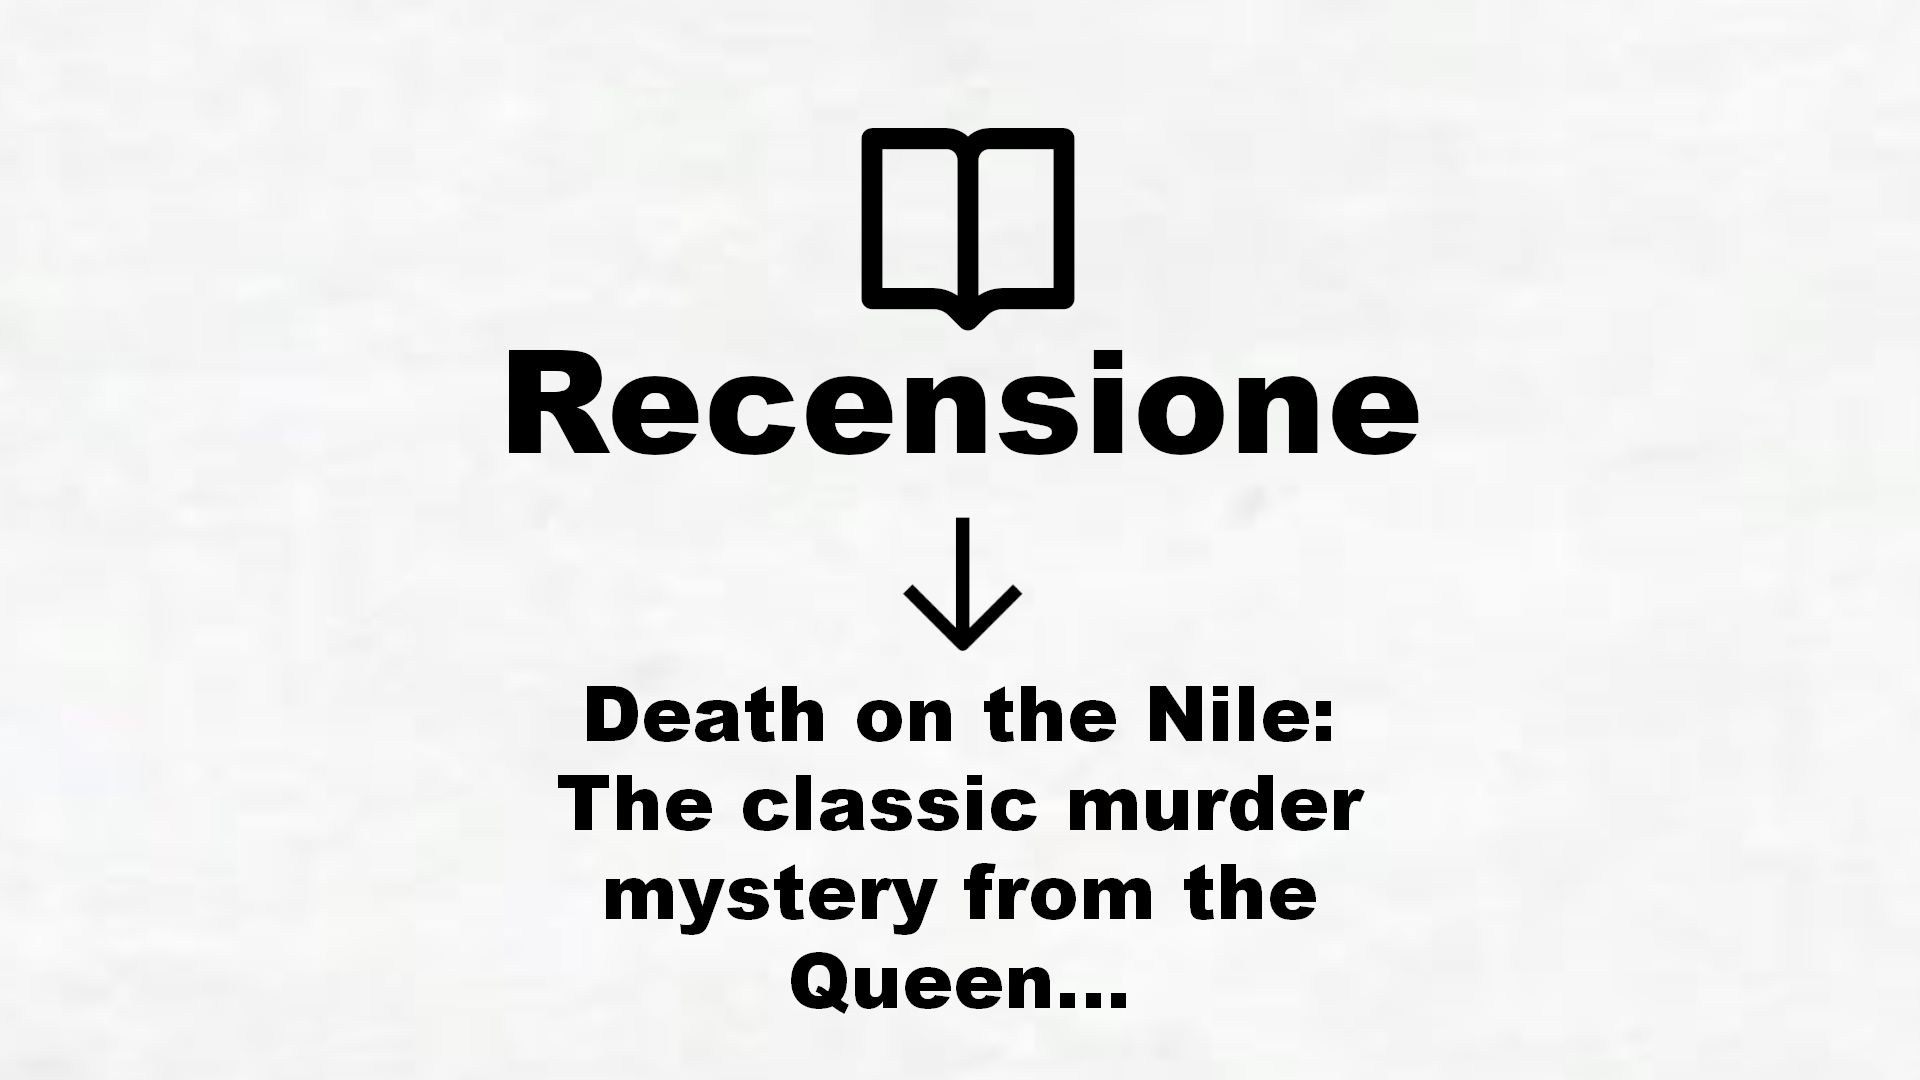 Death on the Nile: The classic murder mystery from the Queen of Crime (Poirot) (Hercule Poirot Series Book 17) (English Edition) – Recensione Libro